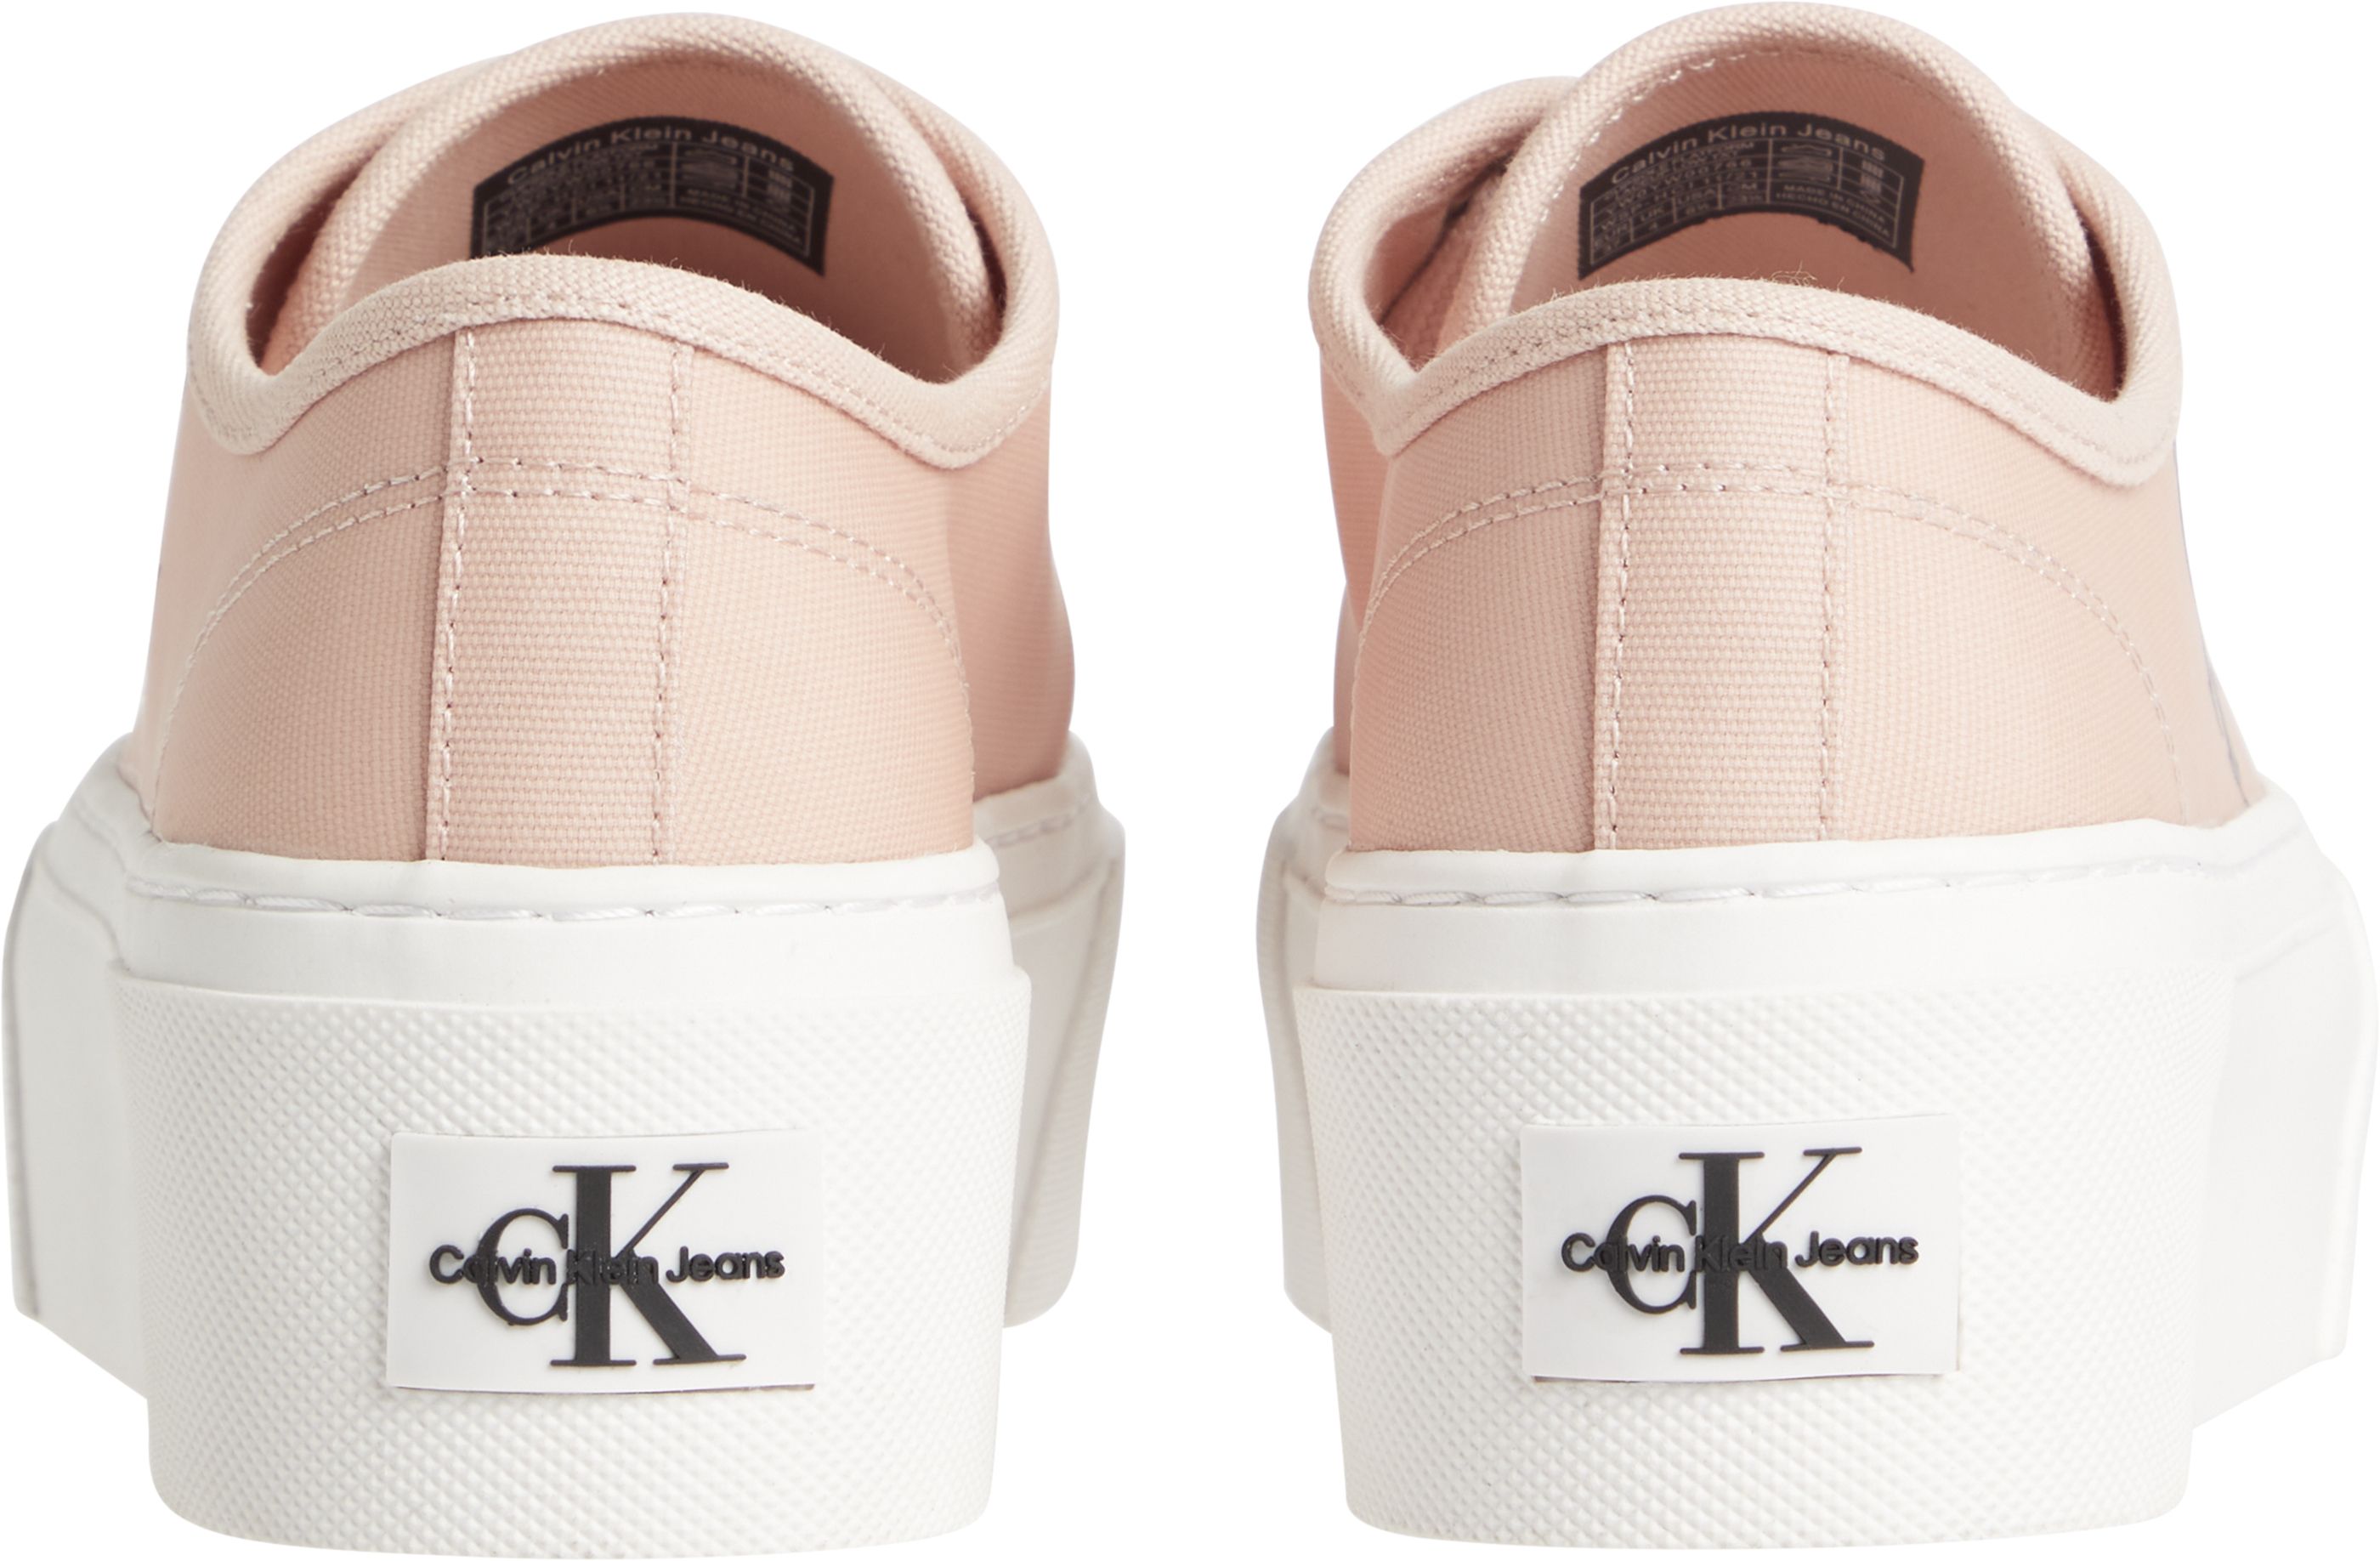 Calvin Klein Jeans Canvas Sneakers With Platform